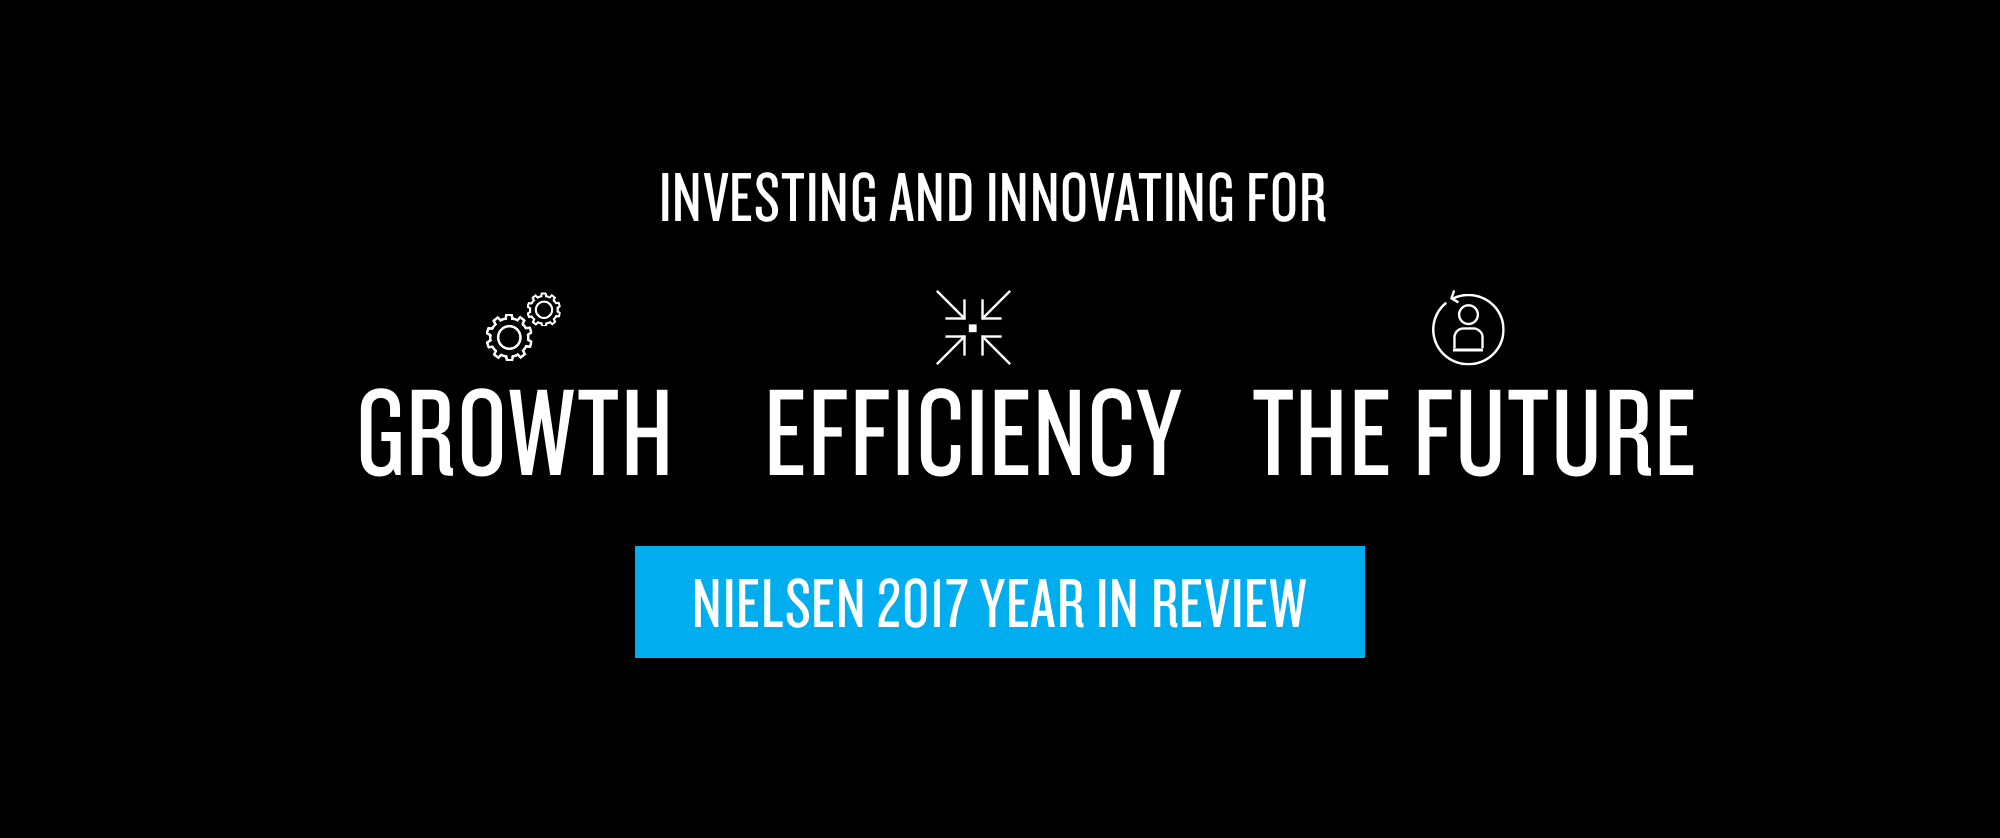 2017 Year in Review: Investing and innovating for growth, efficiency ...